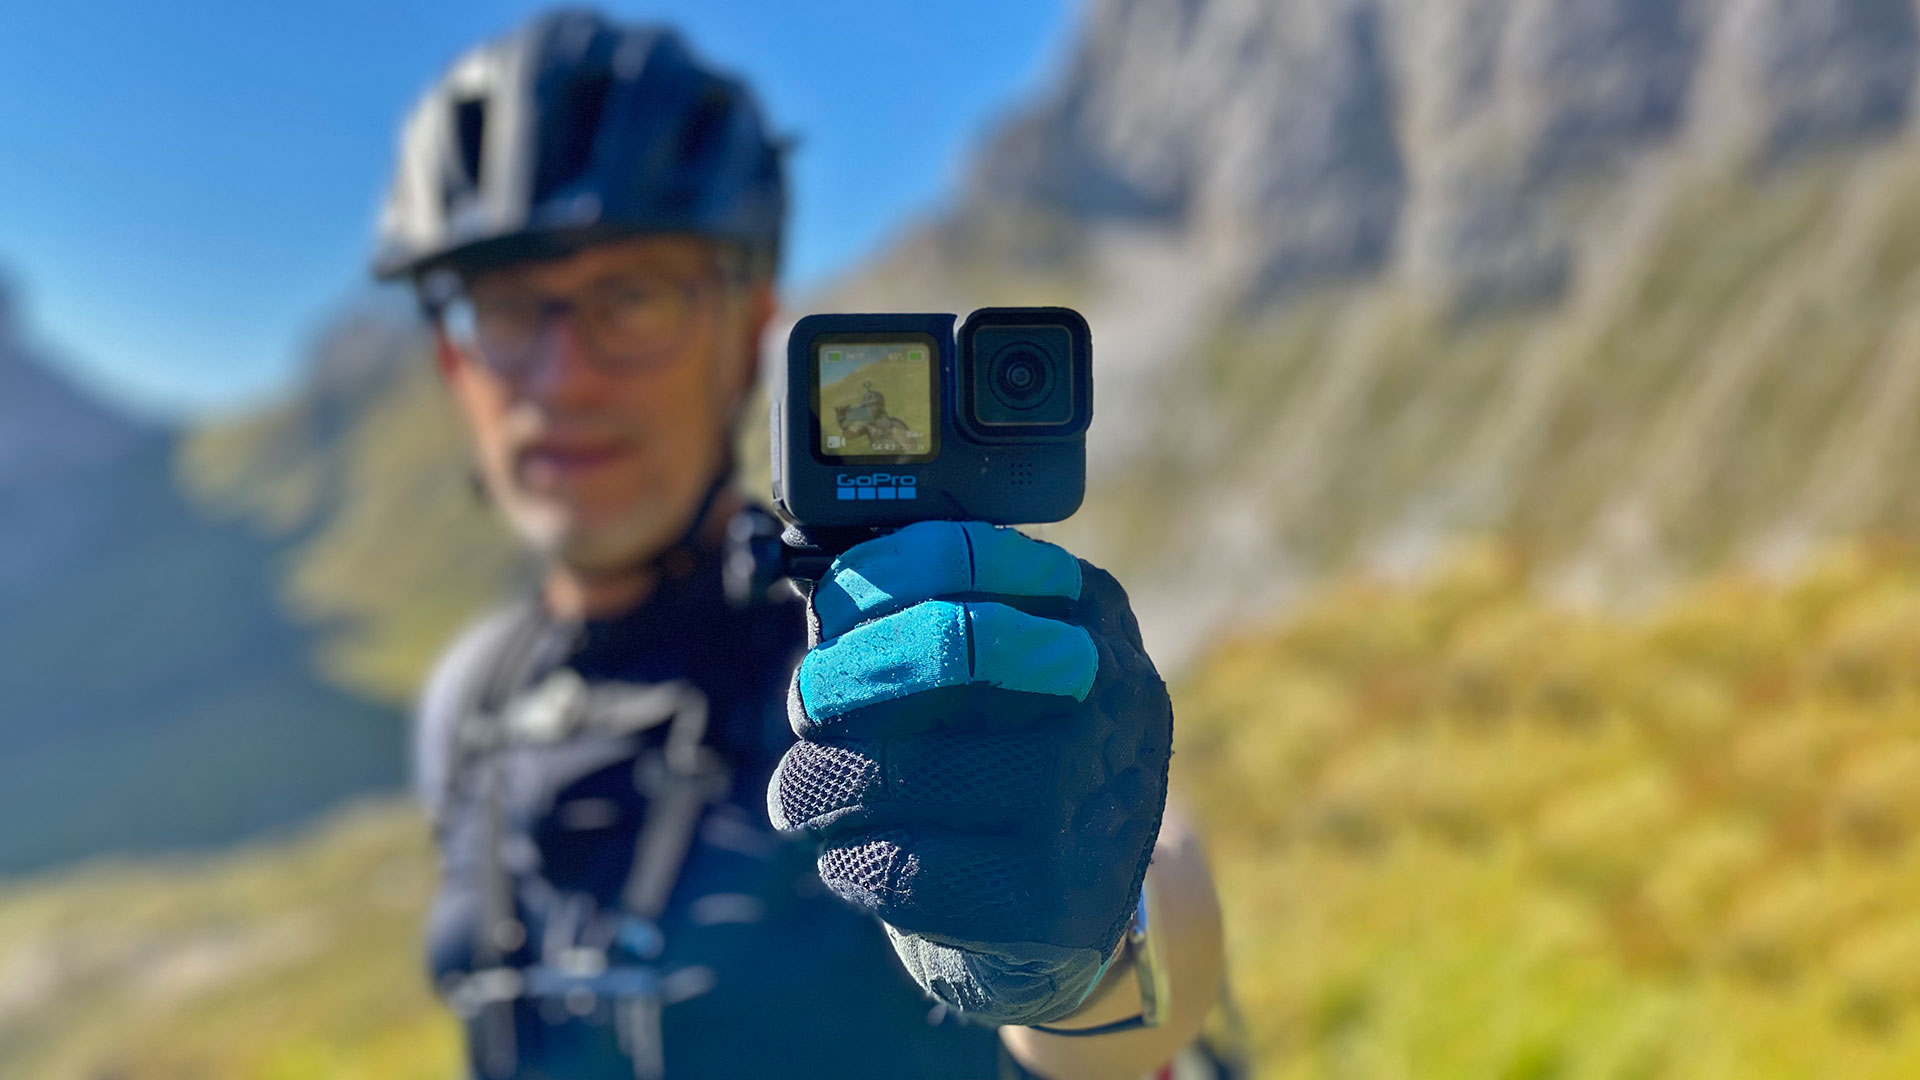 GoPro HERO 10 Black Review - Field Test on a 4 Day